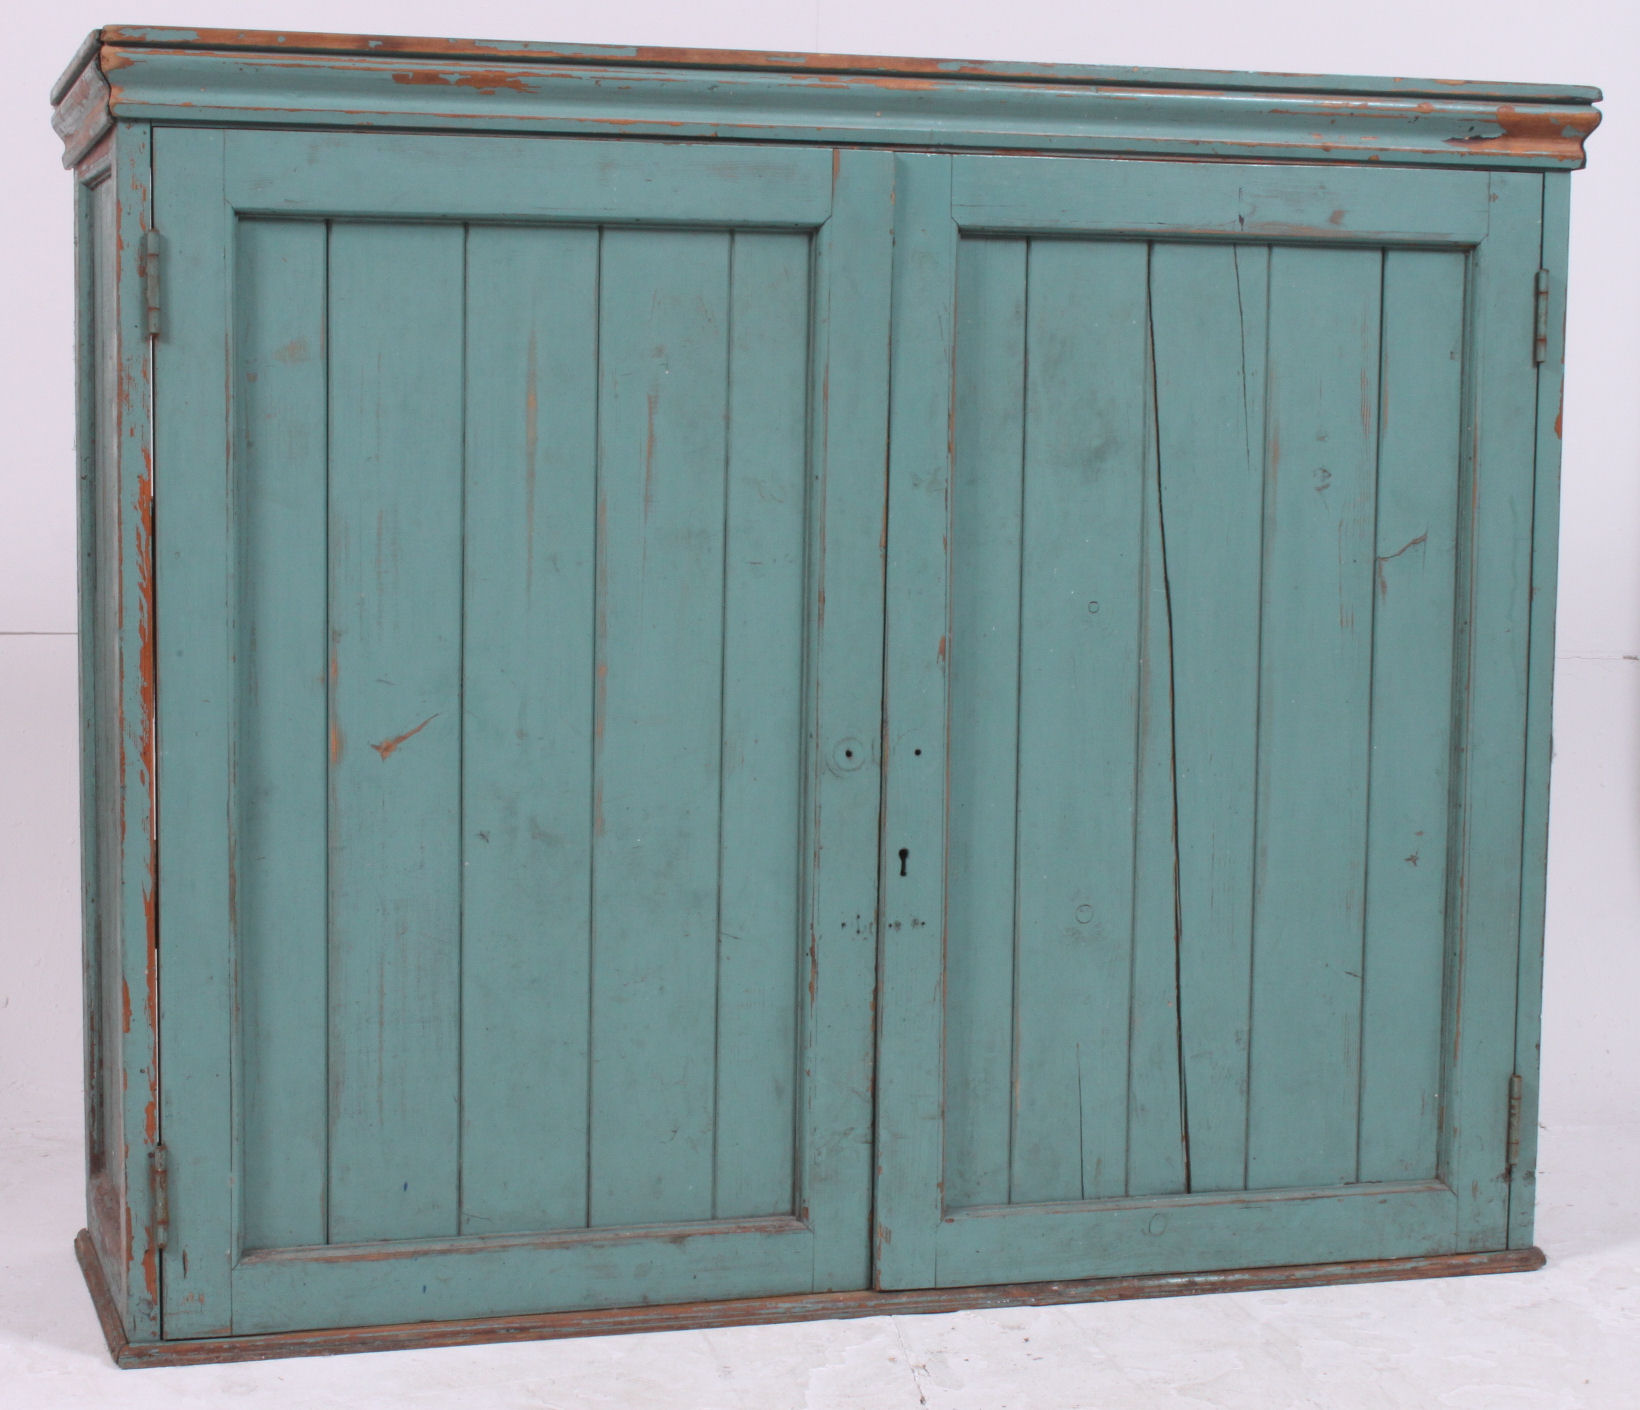 An early 20th century shabby chic painted pine school cupboard / cabinet.